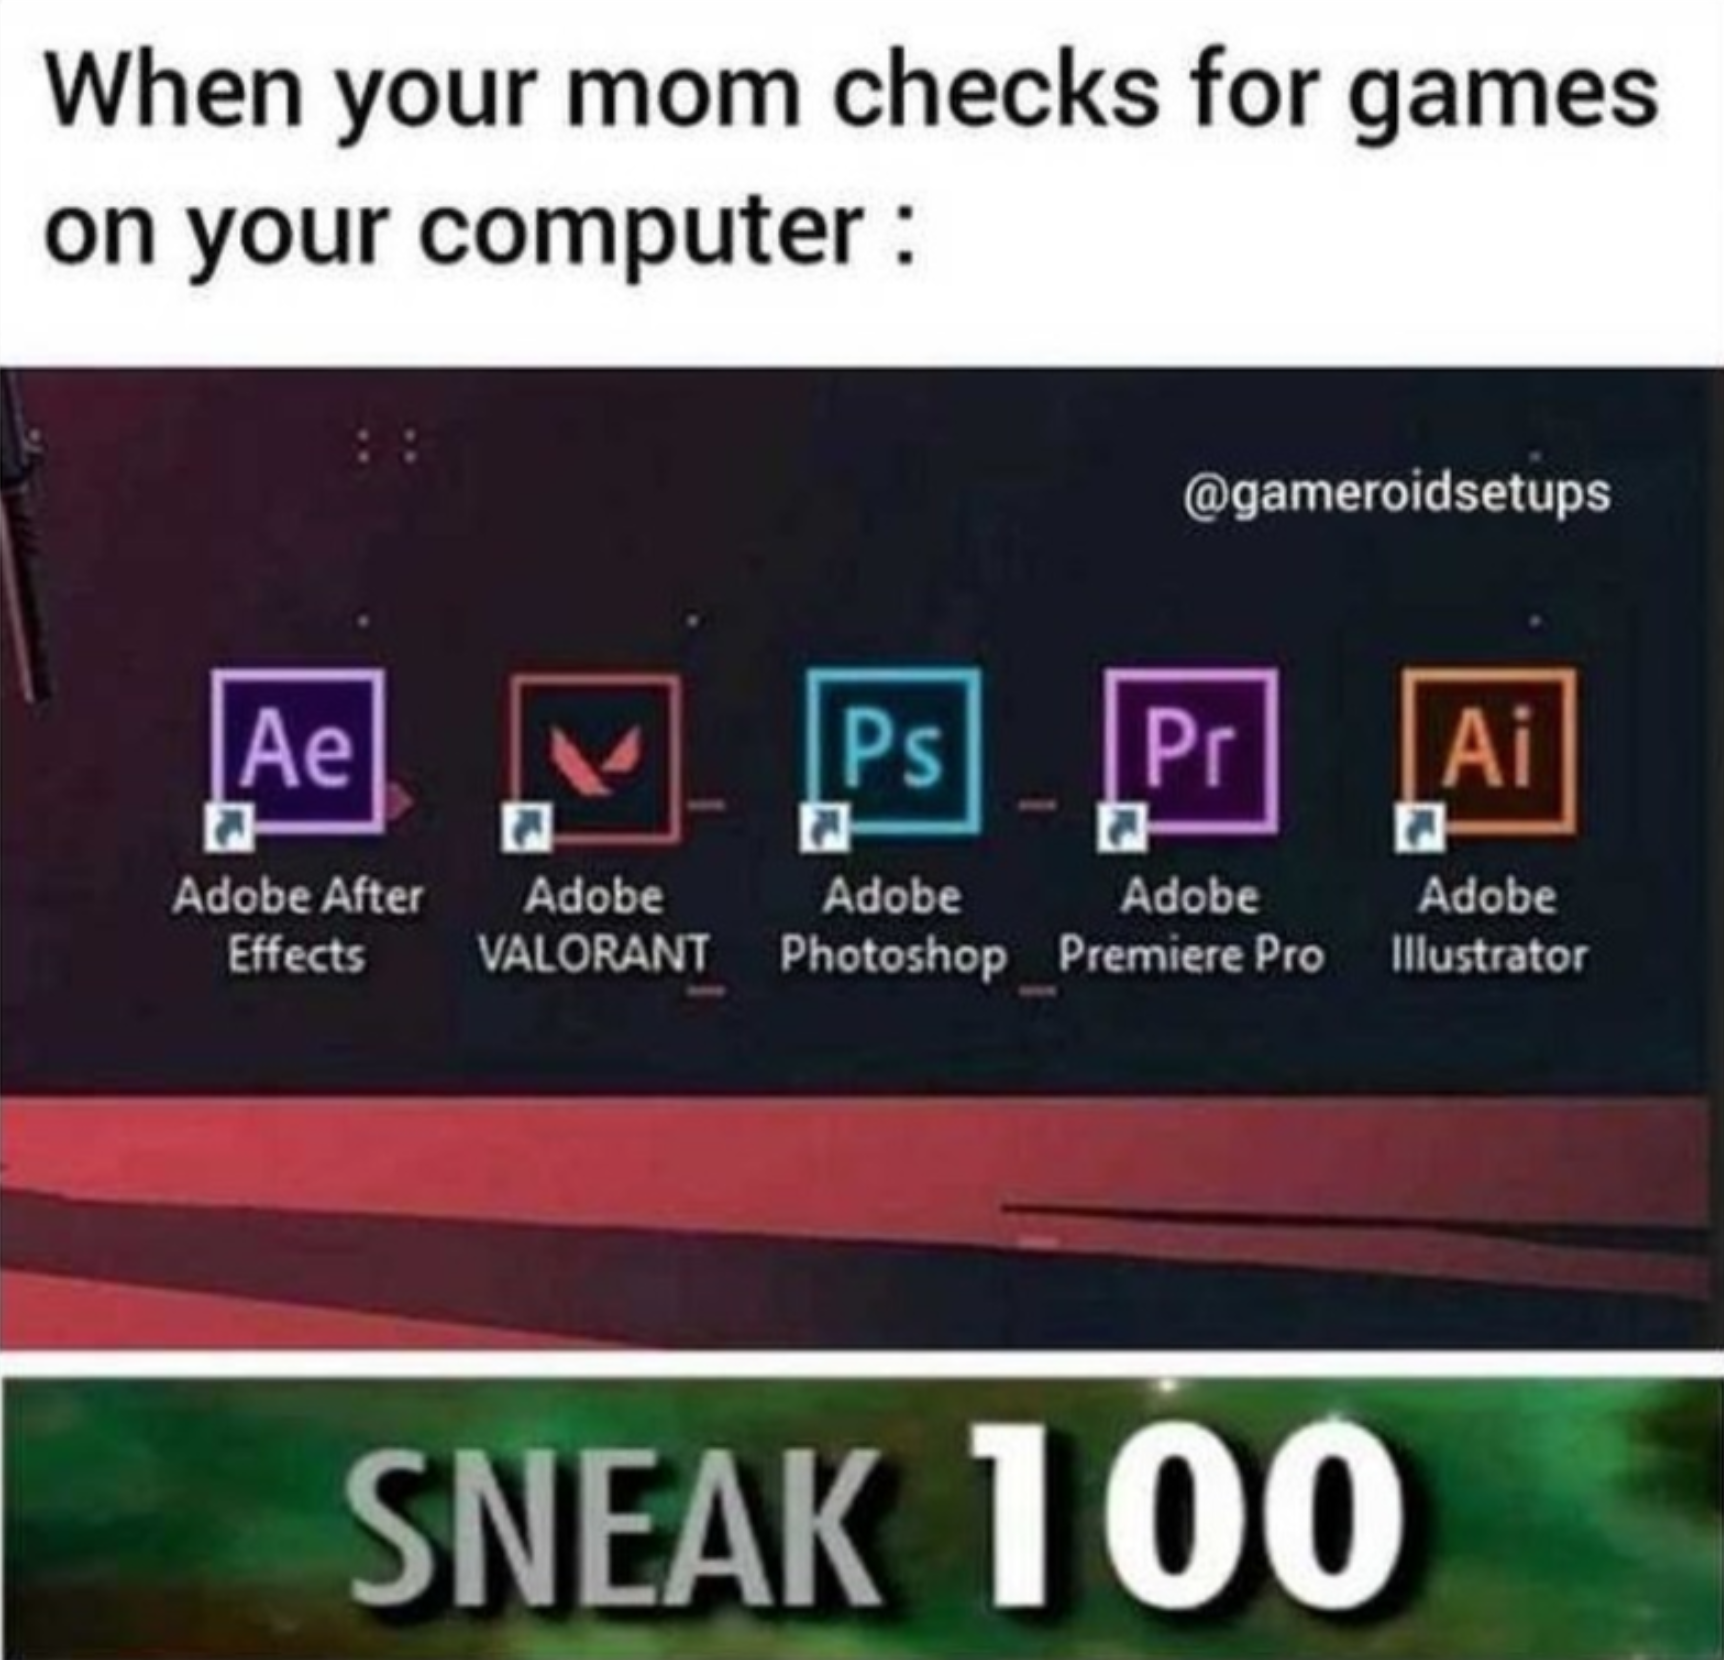 funny gaming memes - multimedia - When your mom checks for games on your computer Ae Ps Pr Ai Adobe After Effects Adobe Adobe Adobe Valorant Photoshop_Premiere Pro Adobe Illustrator Sneak 100